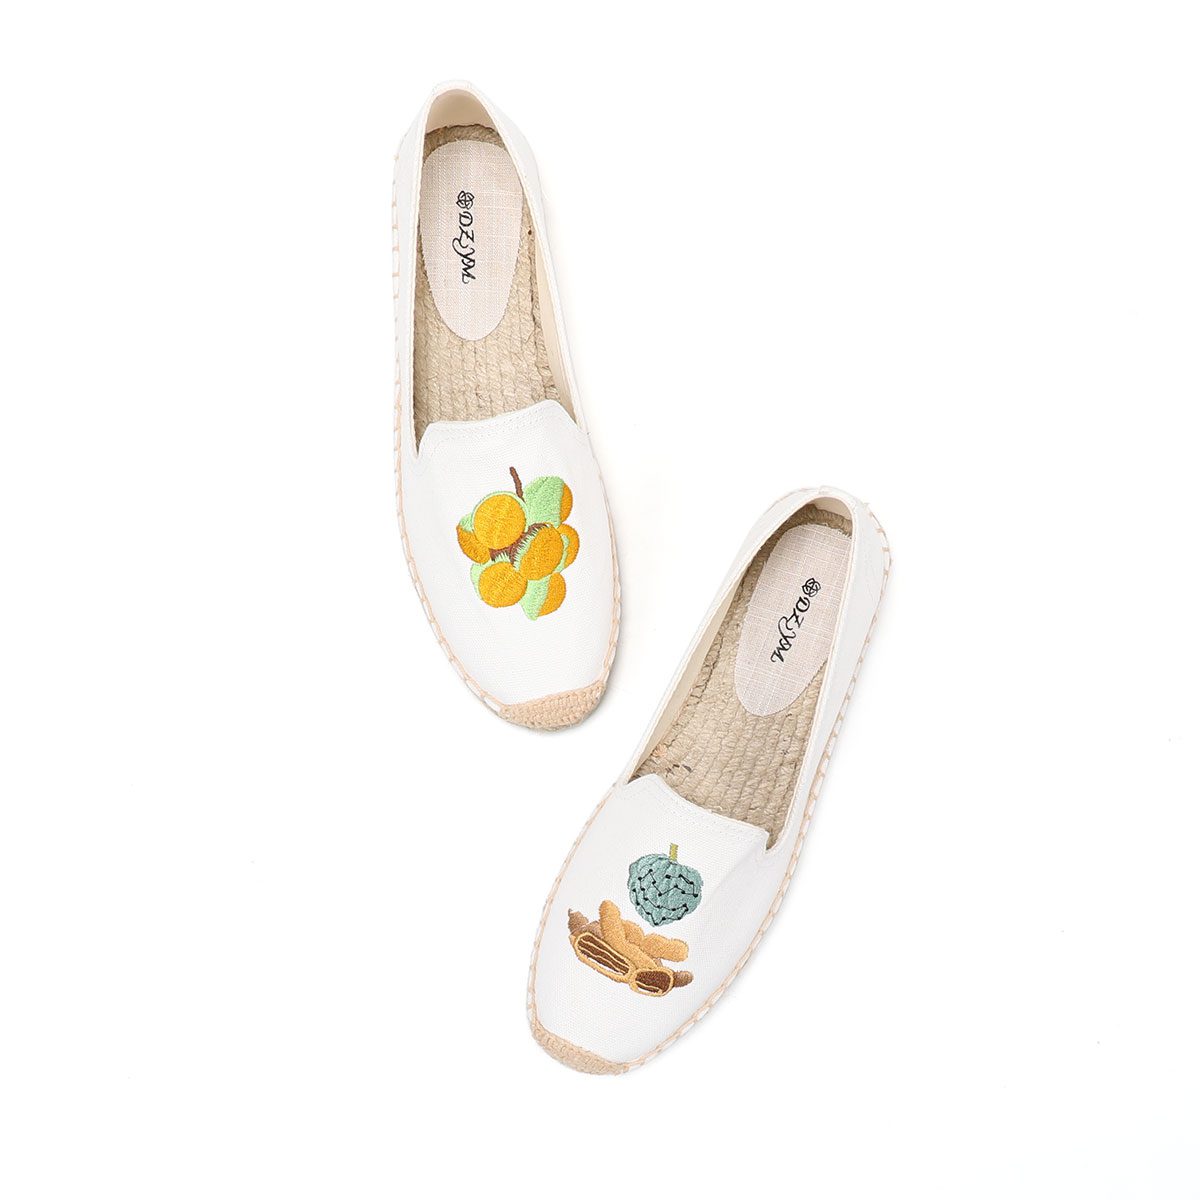 Summer fashion ladies all-match casual white shoes fruit pattern embroidered slip-on canvas shoes high-quality espadrilles